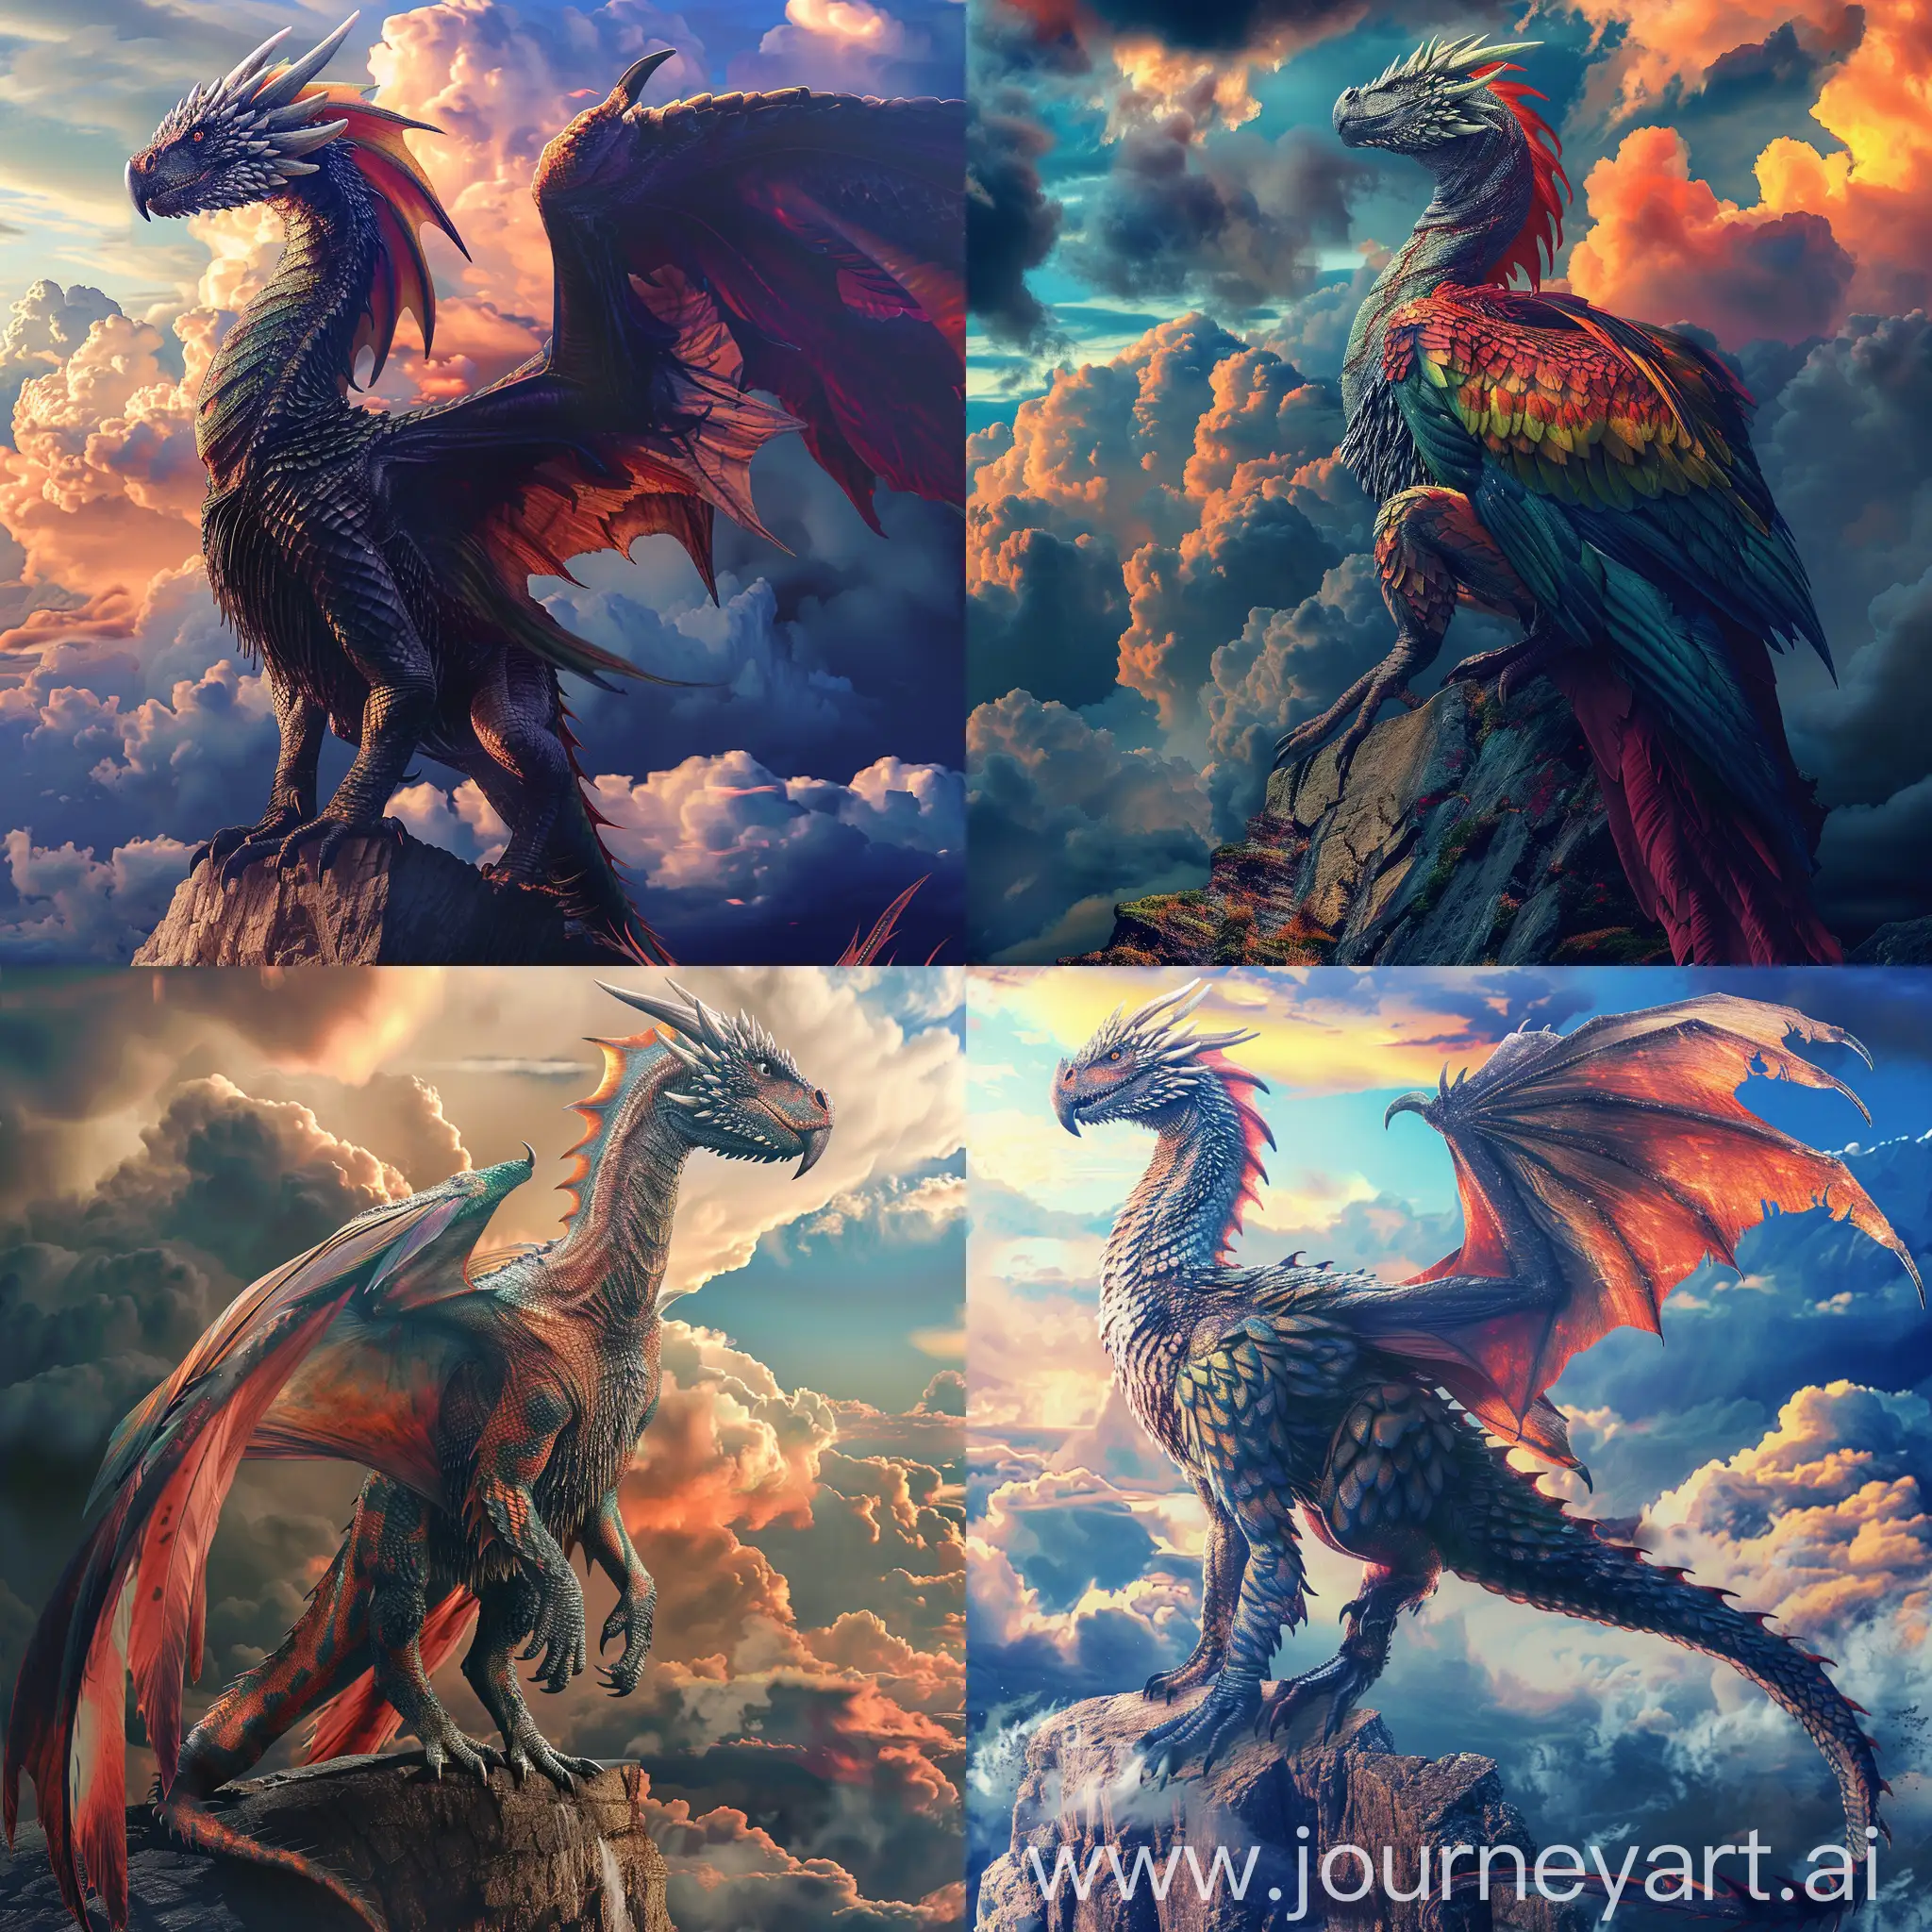 A dragon with the colors of a parrot, muscular, 4k, cinematic, standing on a cliff and spectacular clouds, drogon in game of thrones

